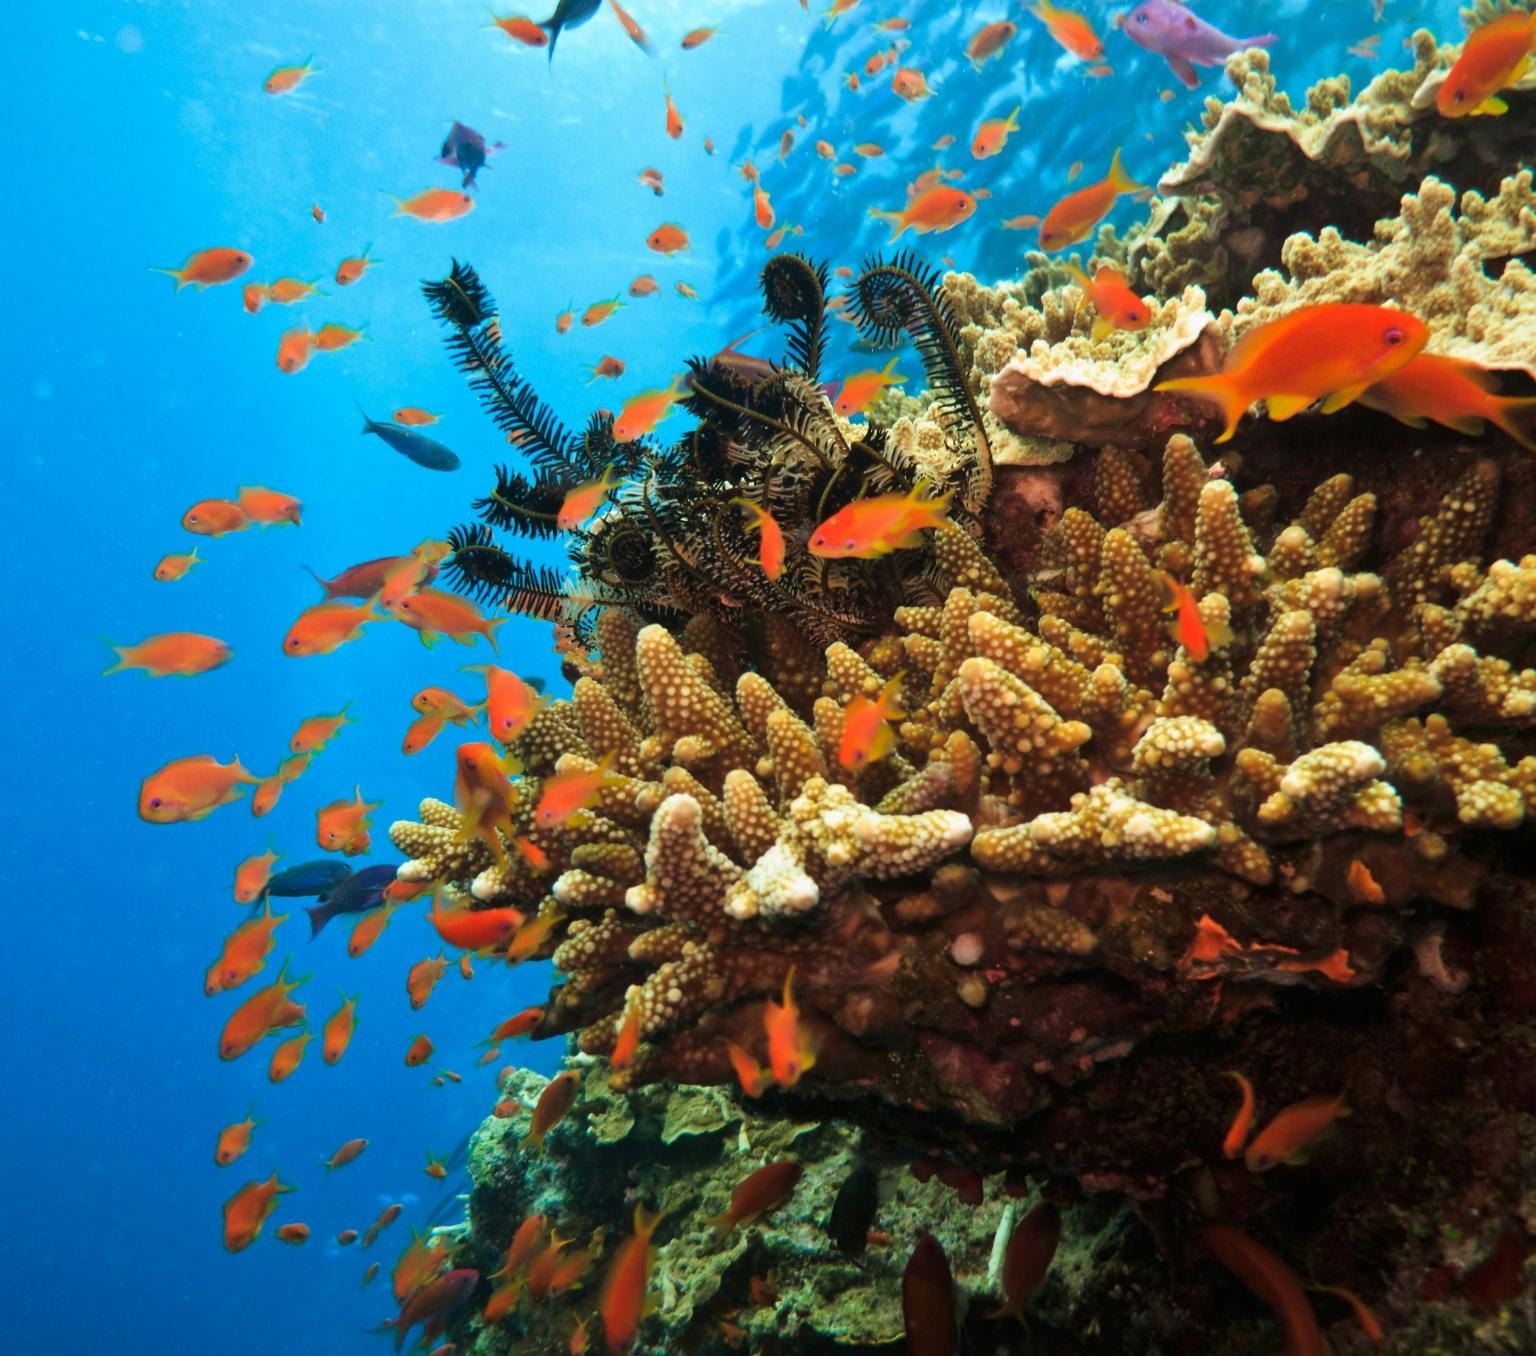 orange fish swimming by coral in Australia's Great Barrier Reef